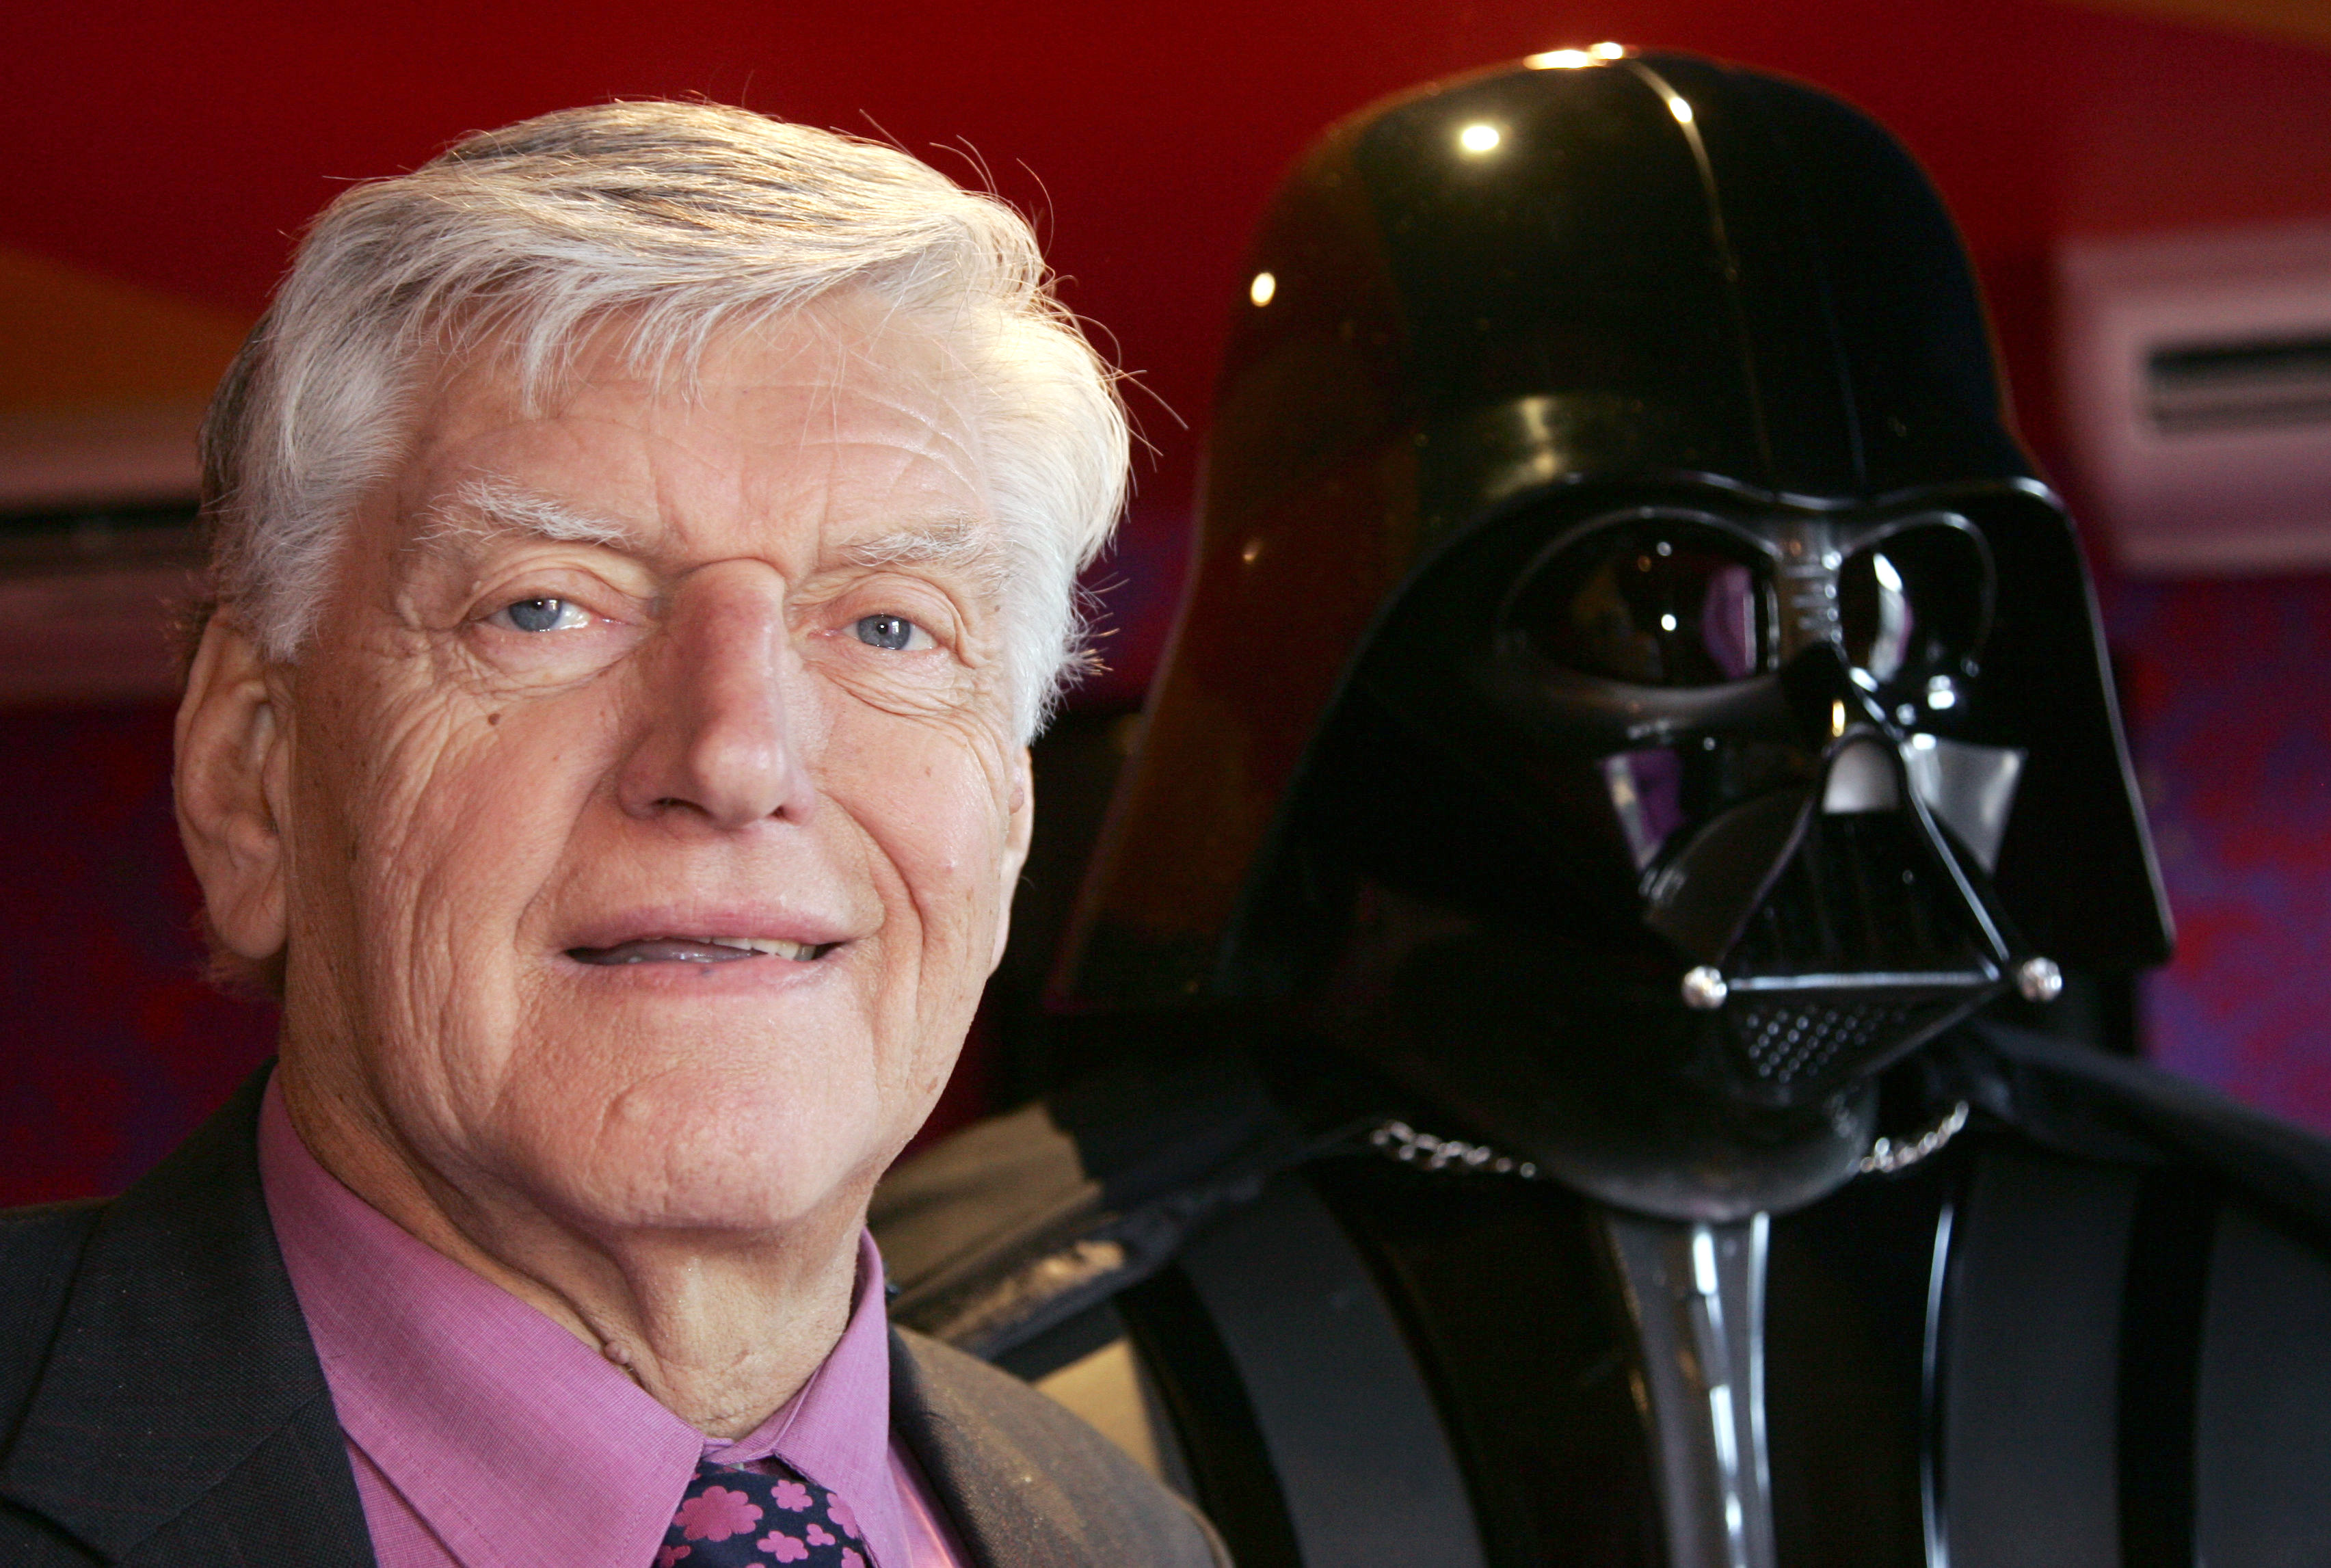 <p>Dave Prowse -- the British character actor who physically played Darth Vader (James Earl Jones provided the villain's voice) in the first "Star Wars" trilogy -- <a href="https://www.wonderwall.com/celebrity/celebs-react-to-darth-vader-actor-dave-prowses-death-405369.gallery">died from complications of COVID-19</a> on Nov. 28. He was 85. Daughter Rachel told The Sun that the 6-foot-6 former bodybuilder had Alzheimer's and for the last two weeks of his life was battling the coronavirus in a U.K. hospital. "It's horrible that COVID restrictions meant we did not get to see him and say goodbye," she said. "But when we went to collect his stuff from the hospital the nurse said what a cool guy he was. He was such a larger-than-life character. He would have loved to see himself trending on Twitter." </p>